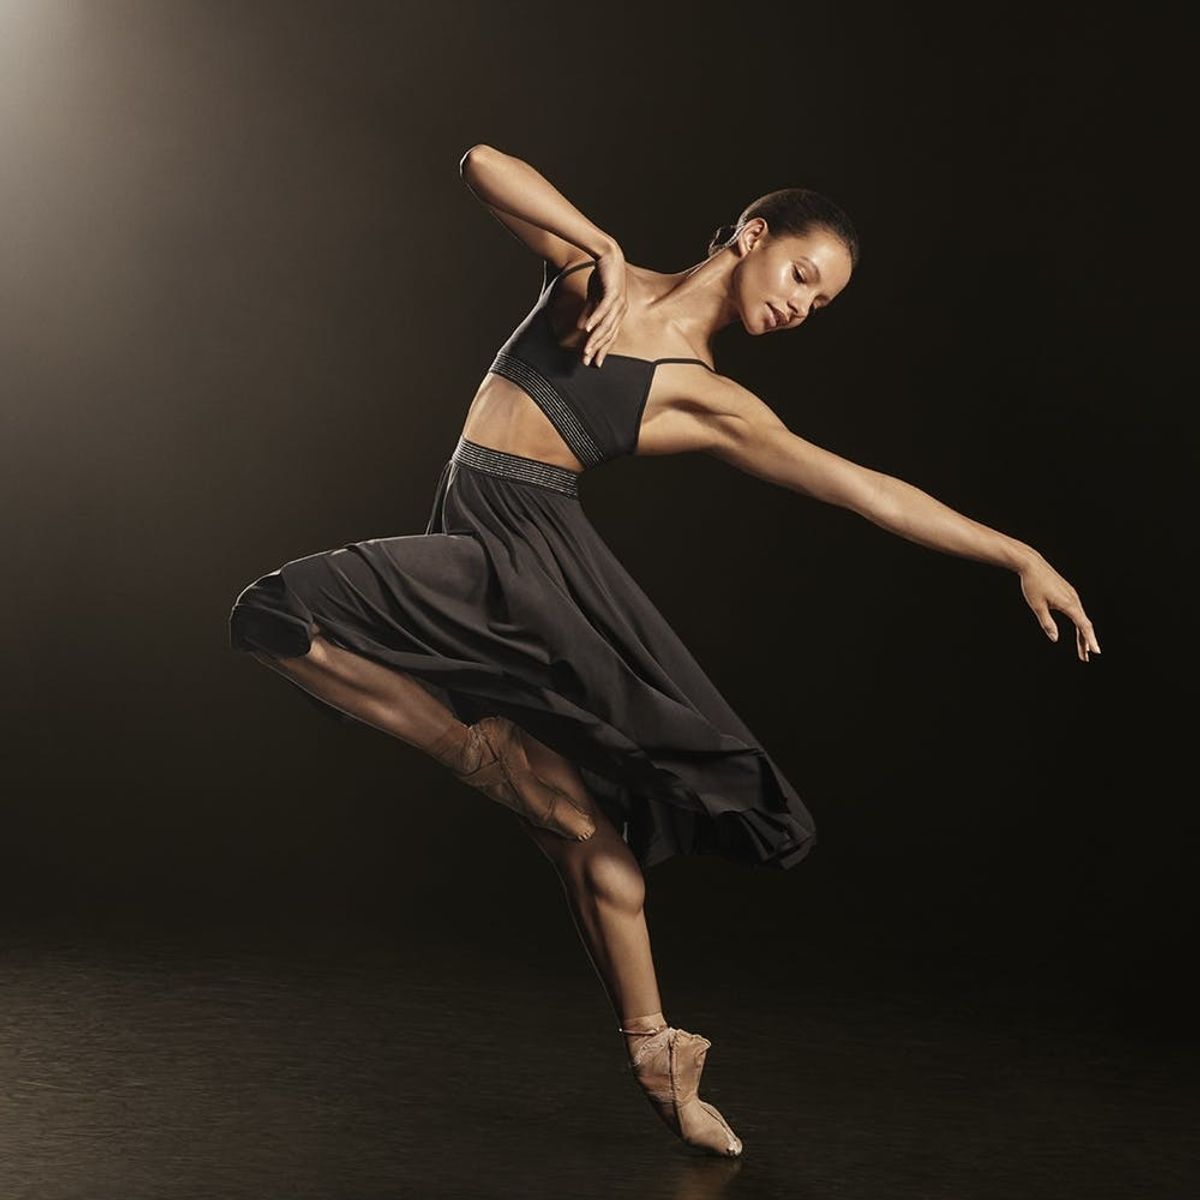 The Royal Ballet Collection From Lululemon Might Be the Most Gorgeous Thing We’ve Ever Seen